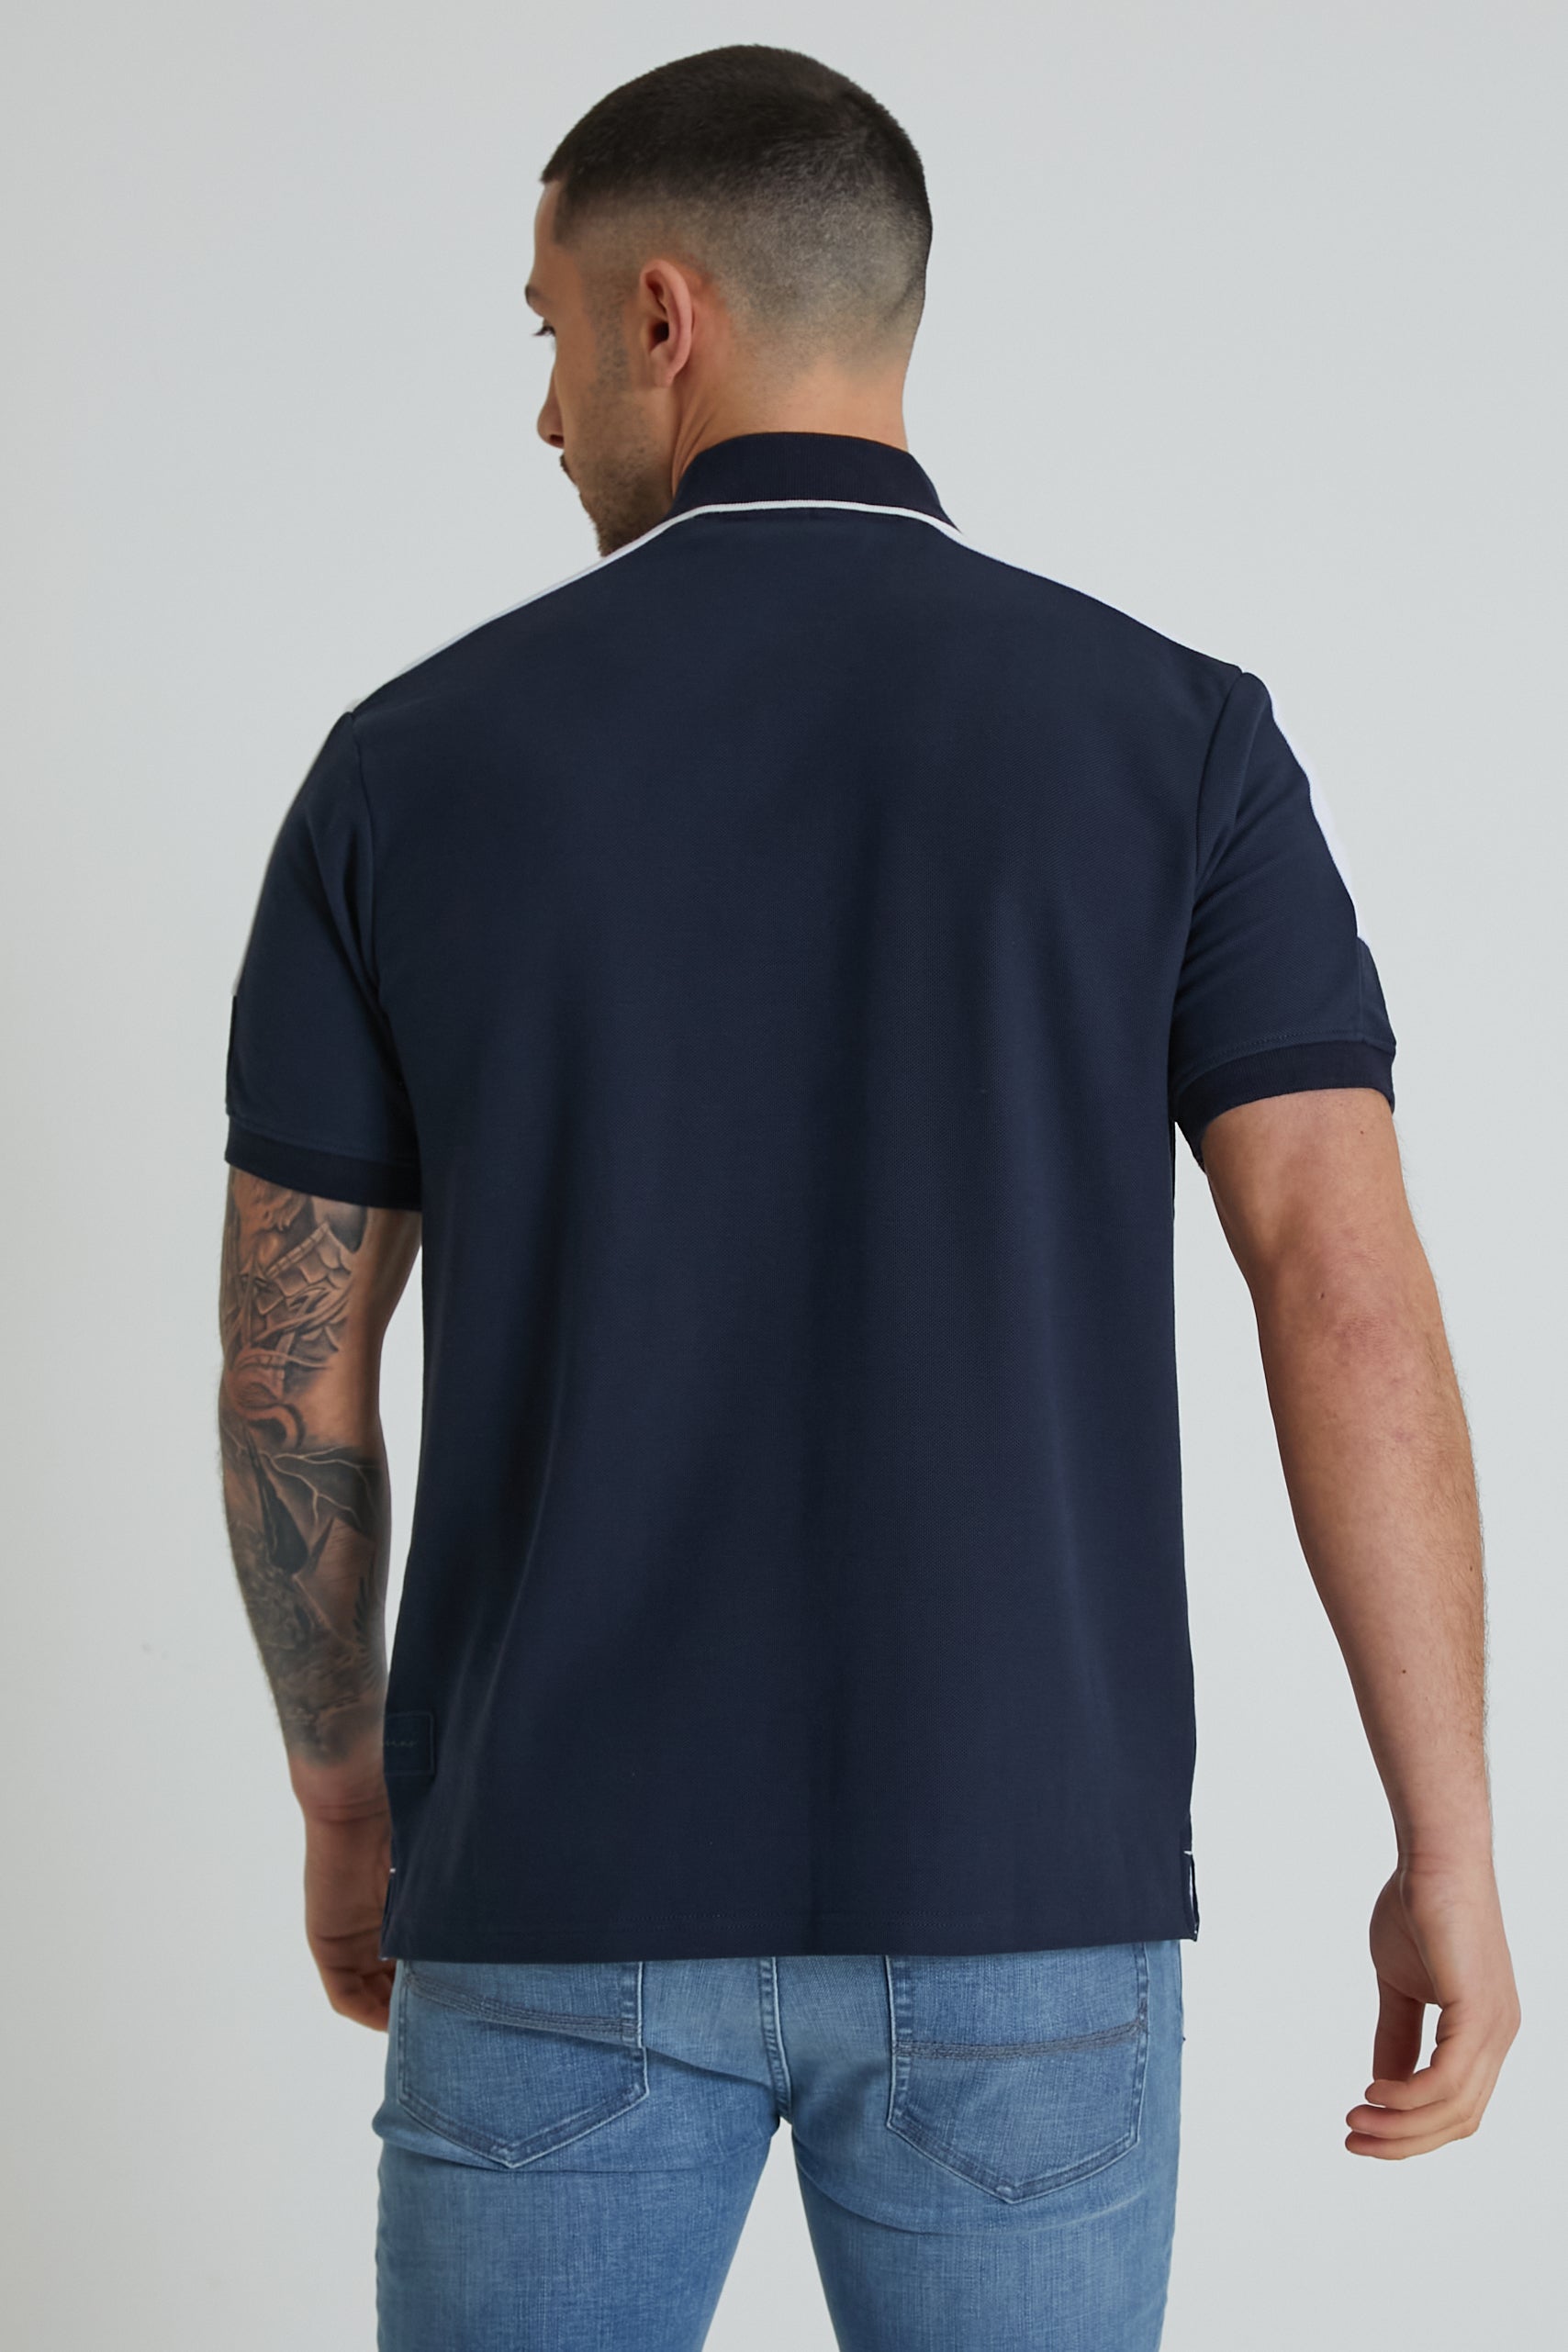 ROBBIE honeycomb pique polo in NAVY with WHITE contrast - DML Jeans 